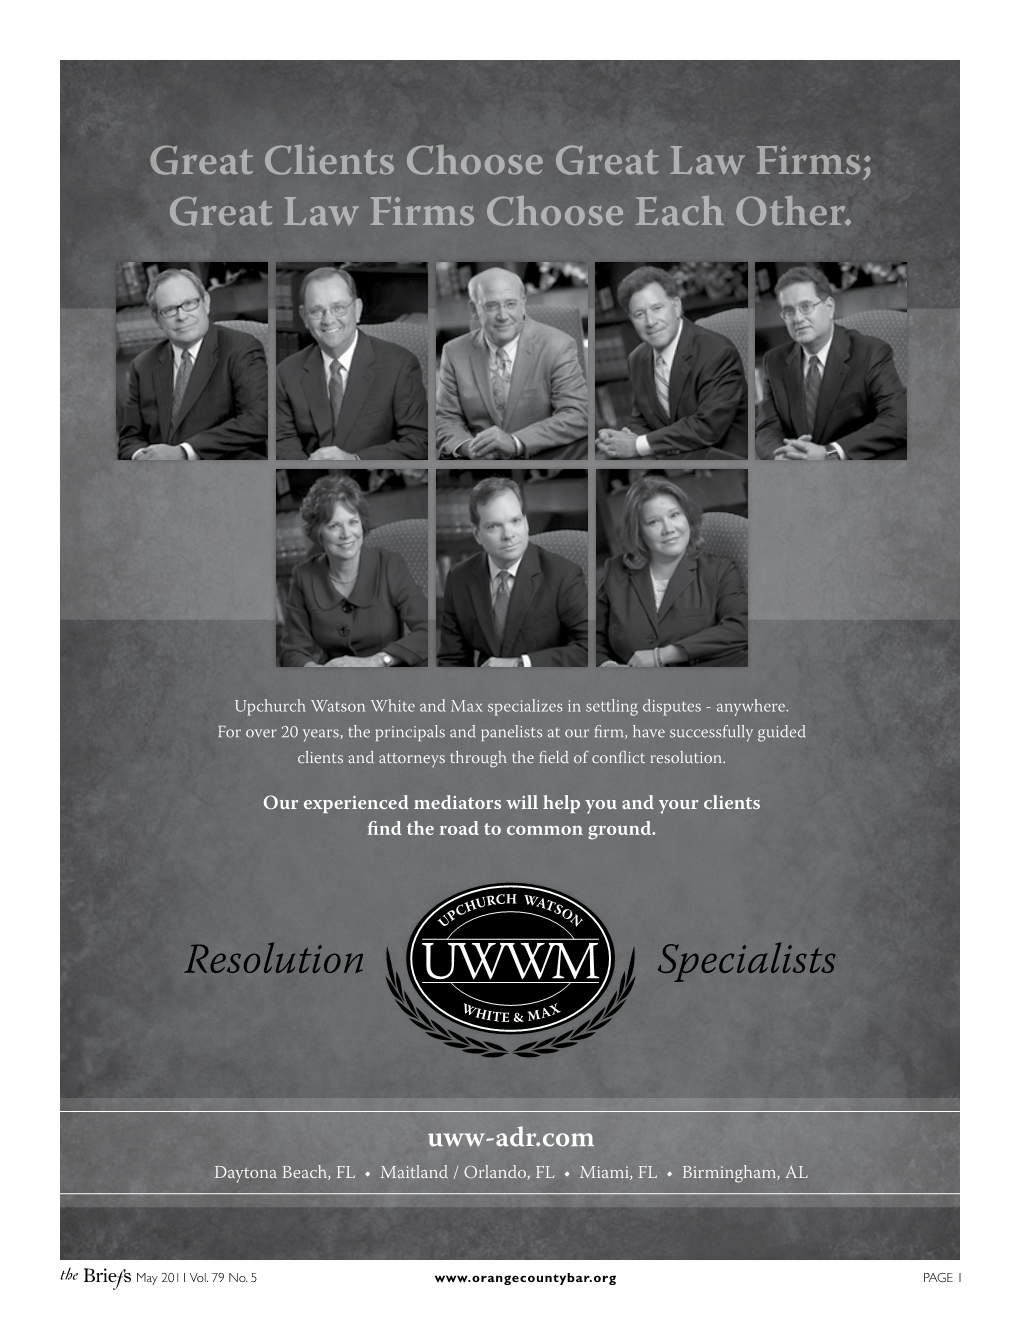 Great Law Firms Choose Each Other. Resolution Specialists